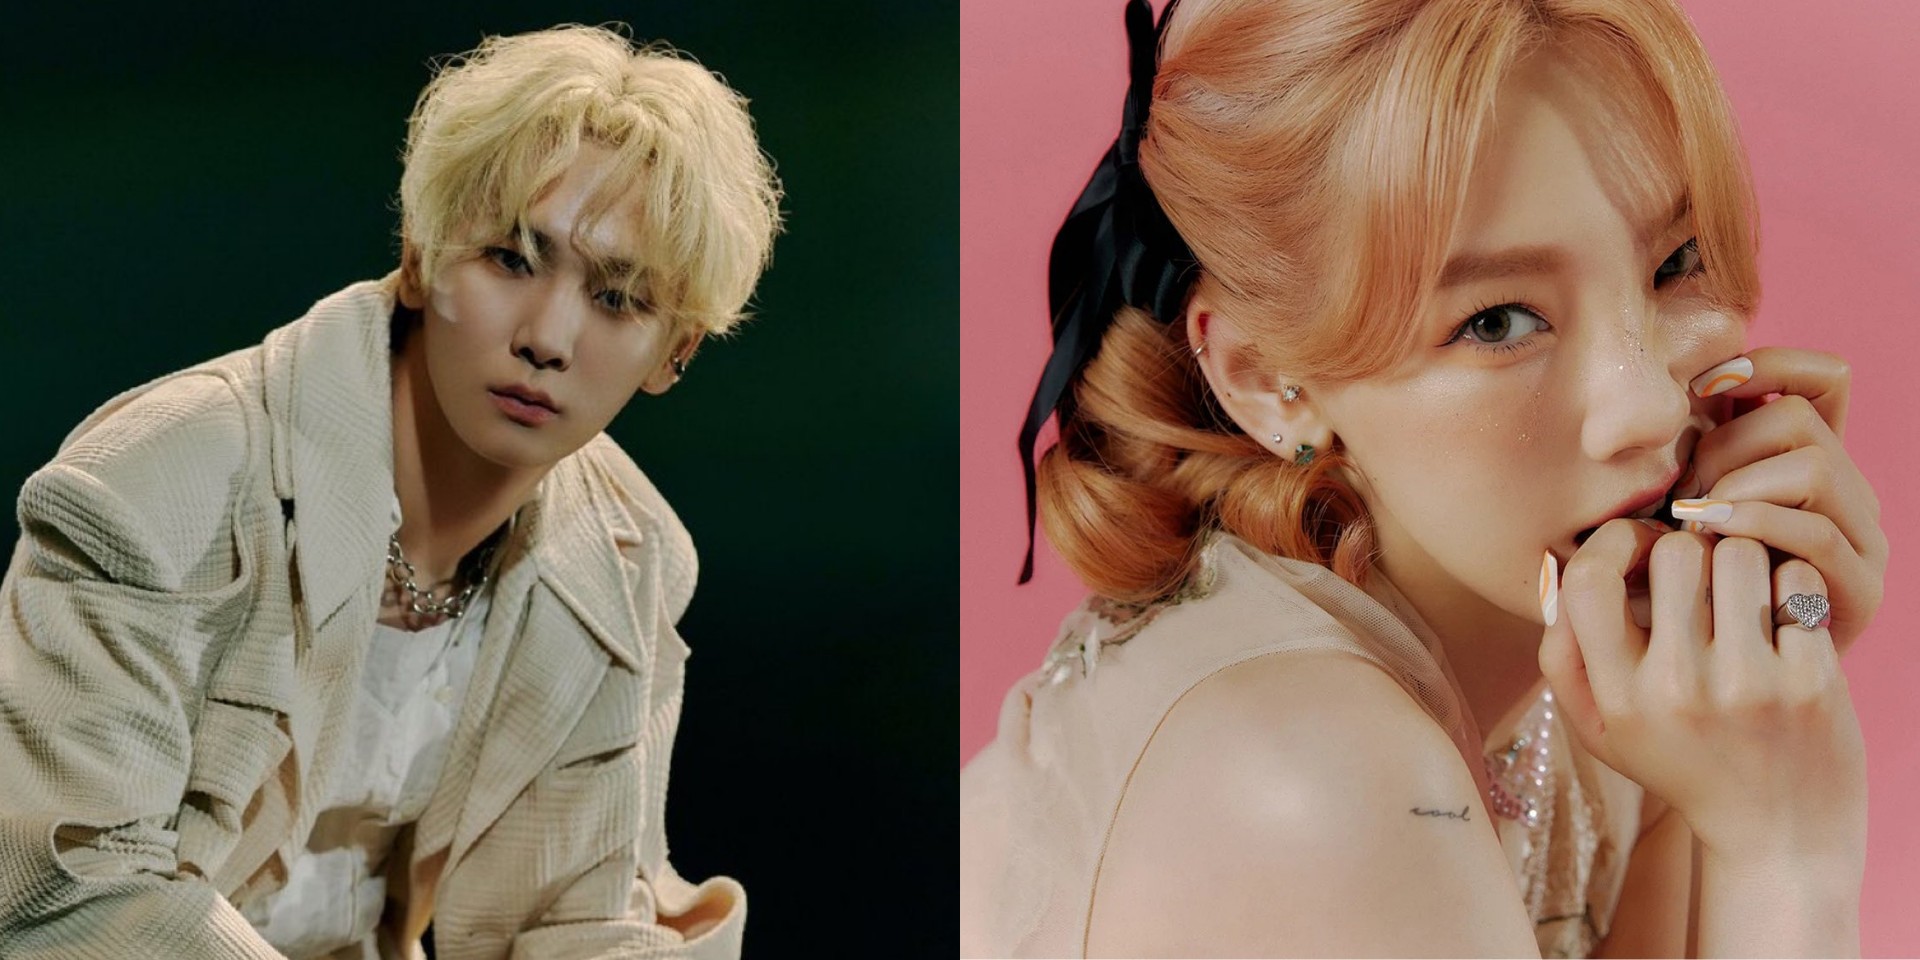 SHINee's Key announces pre-release song 'hate that' featuring Taeyeon